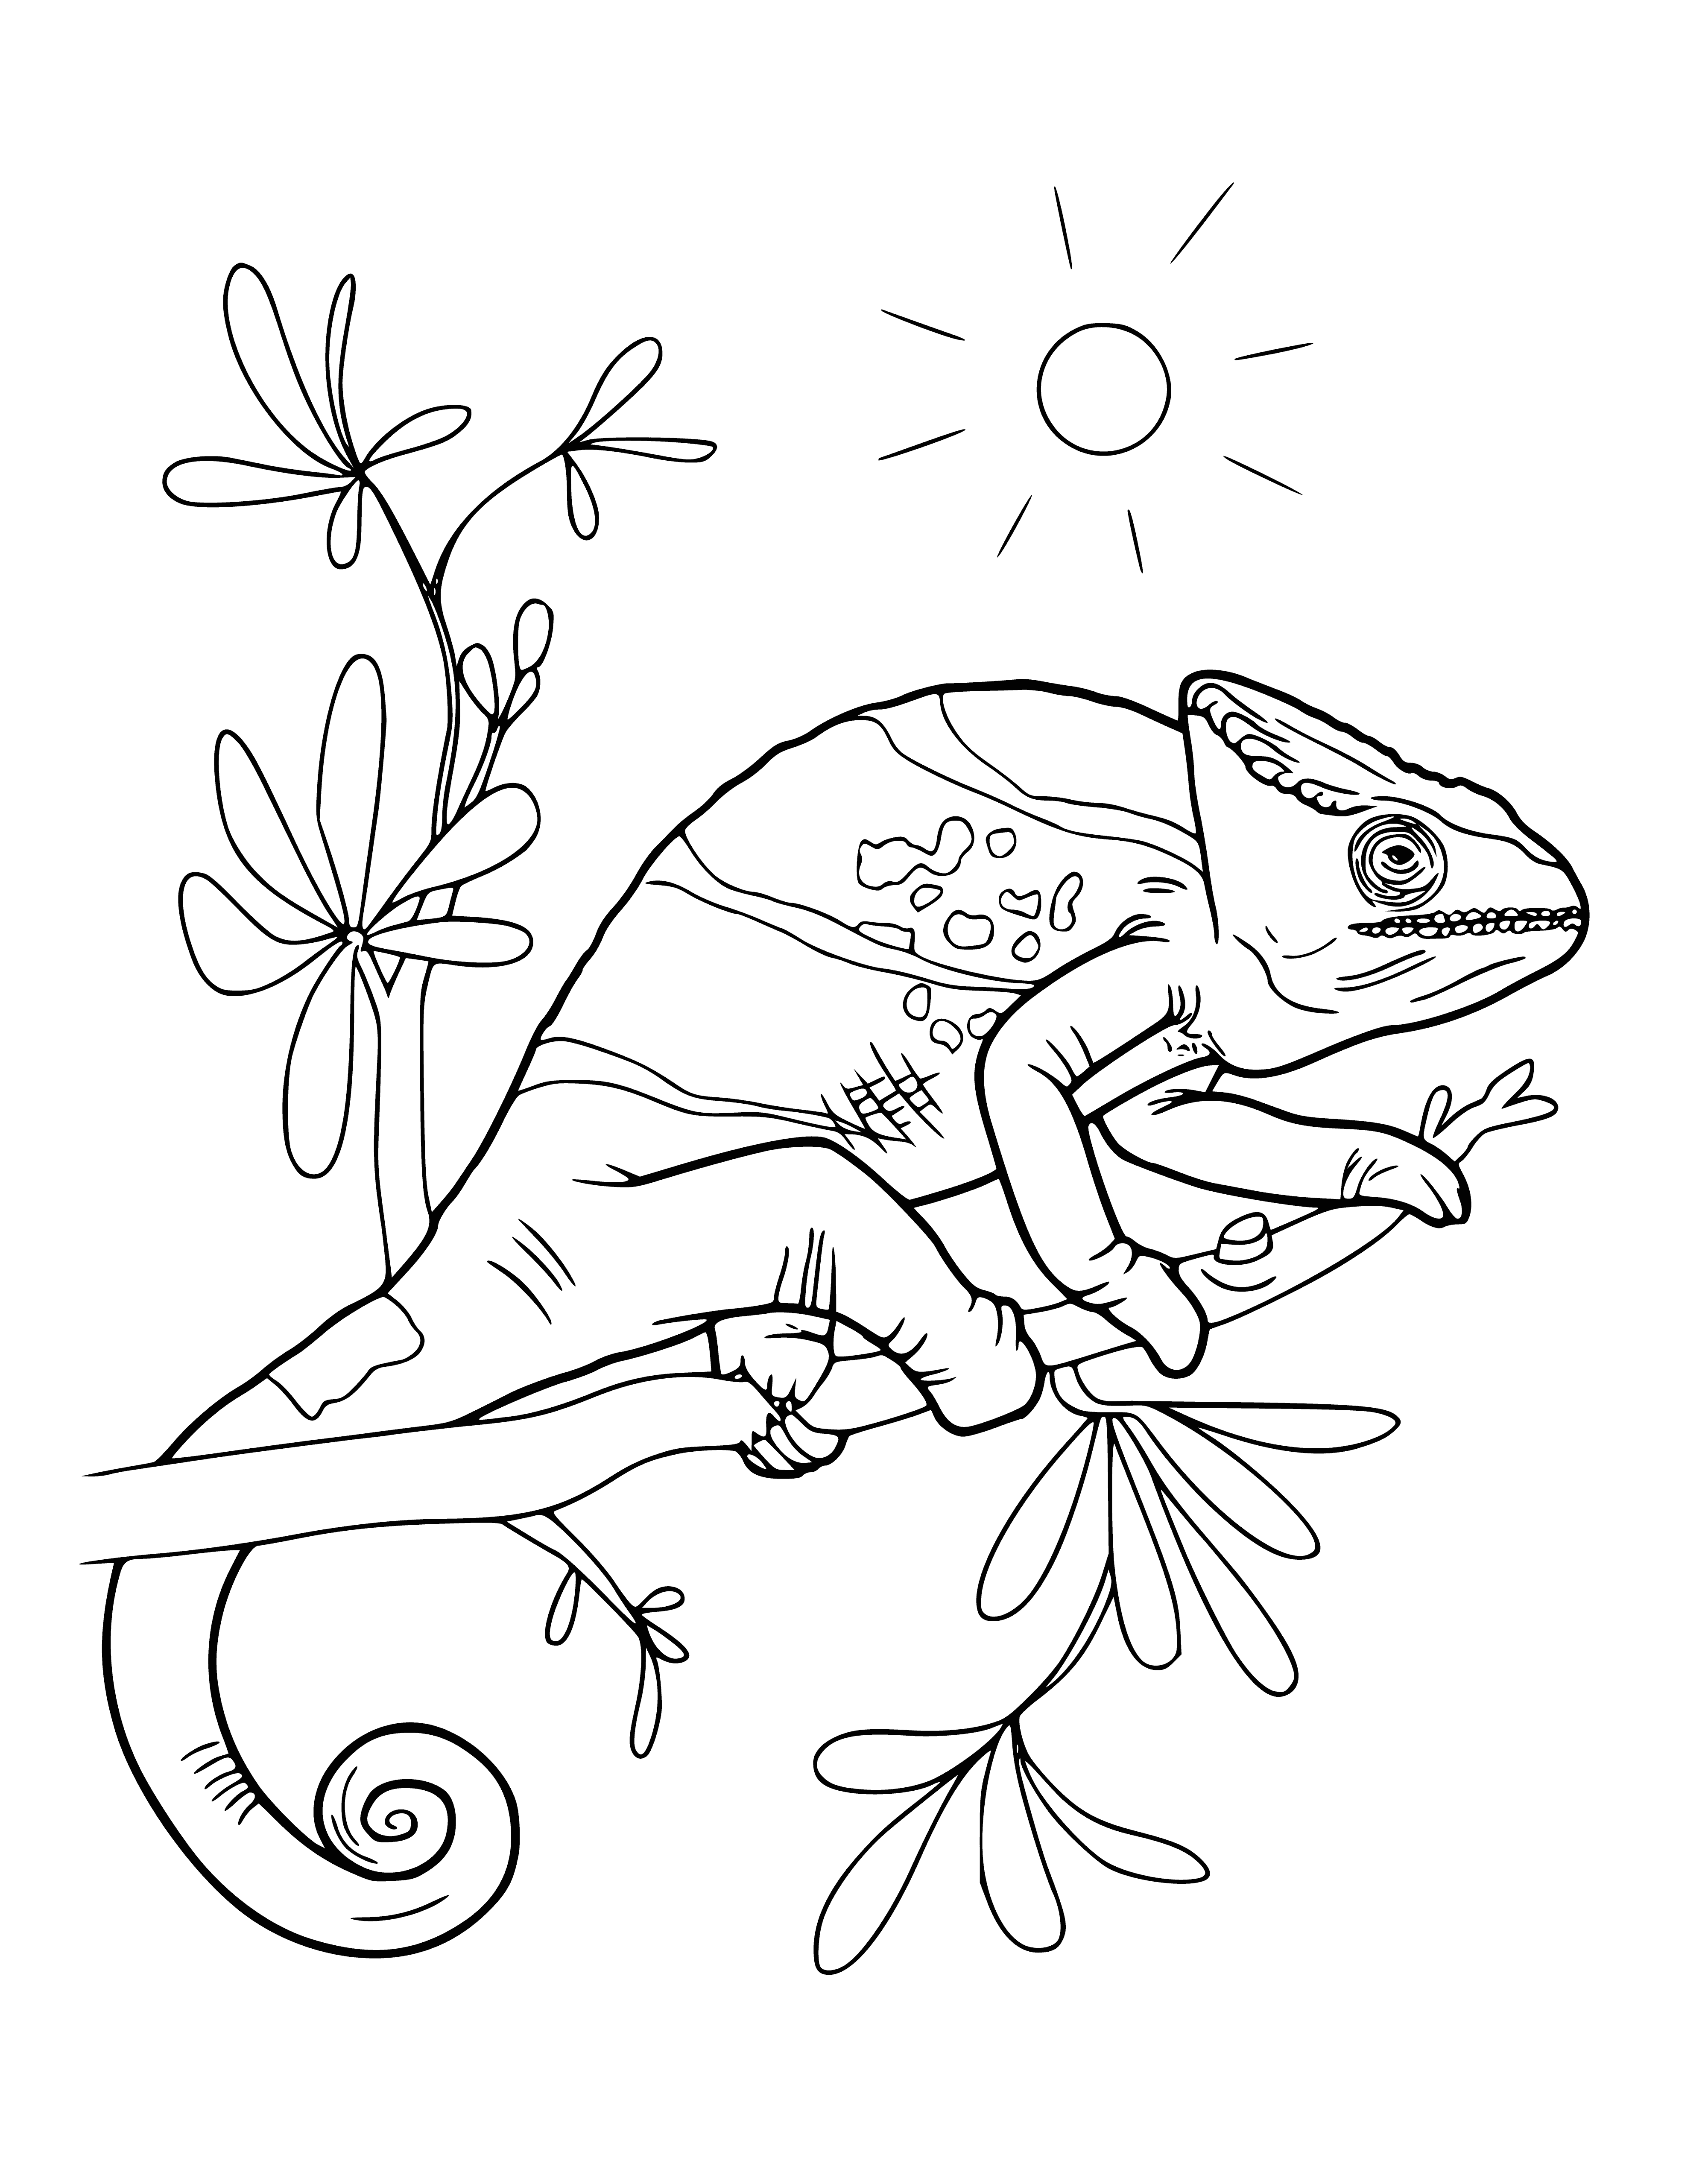 coloring page: Chameleons use incredible camouflage by changing their skin color to blend into their surroundings.